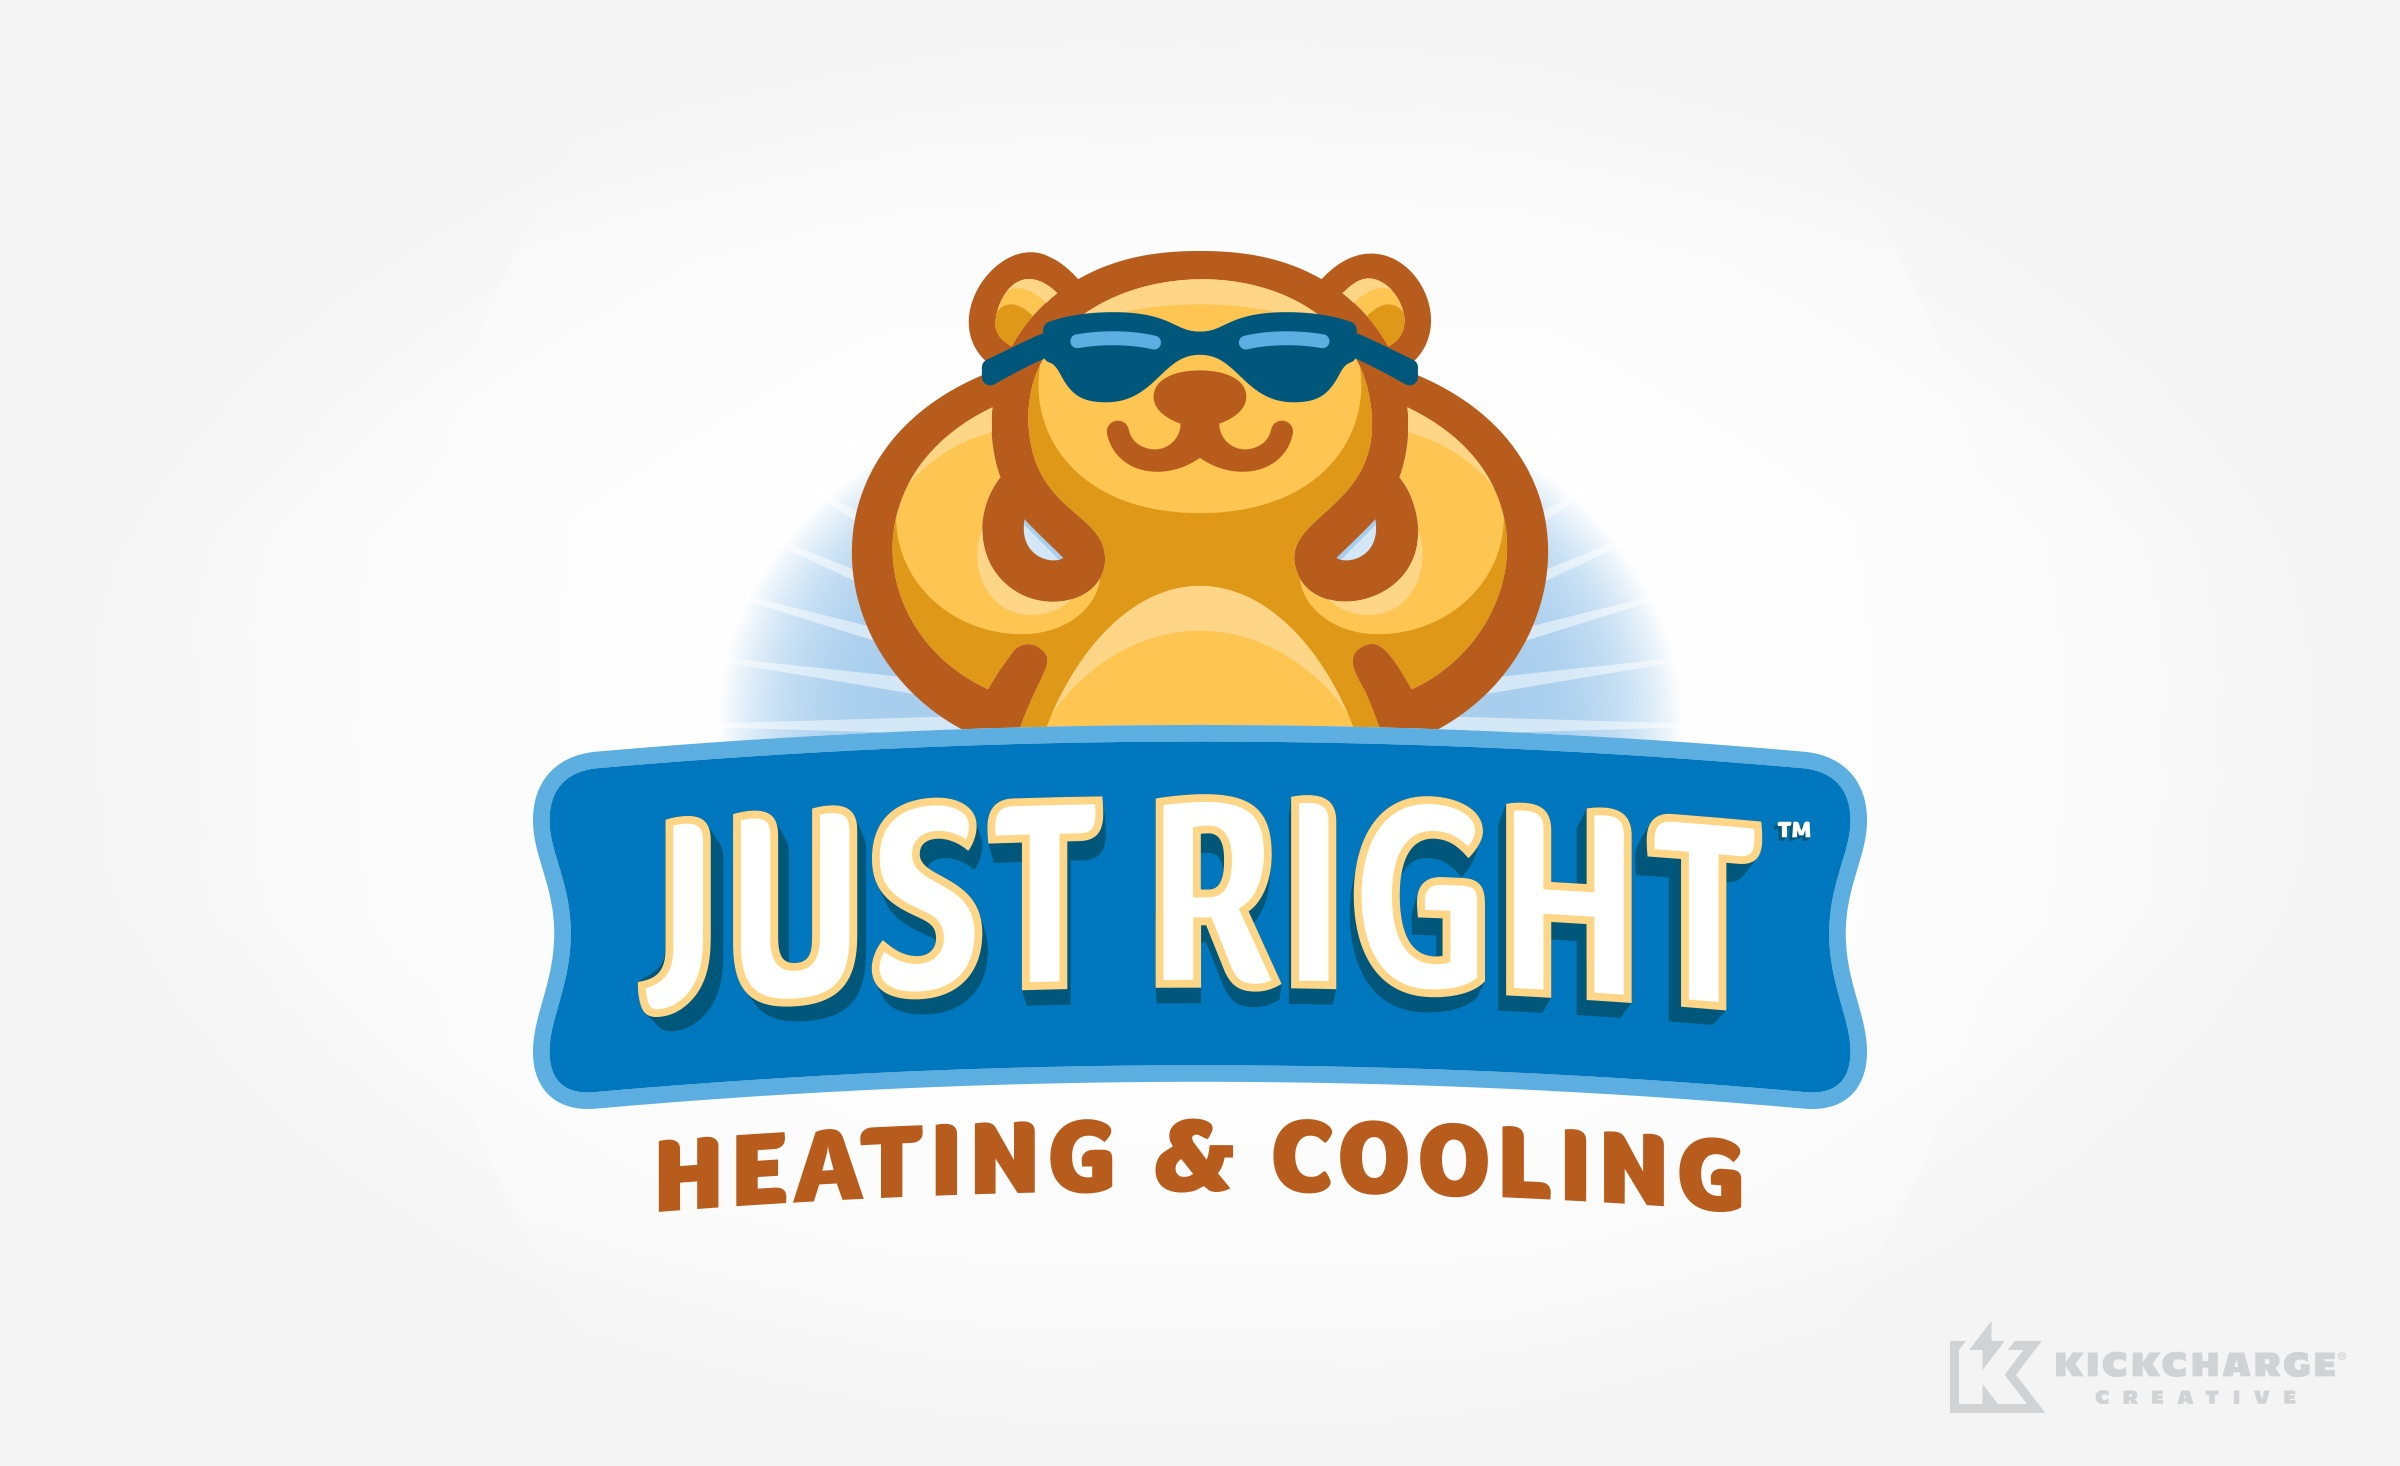 hvac logo for Just Right Heating & Cooling